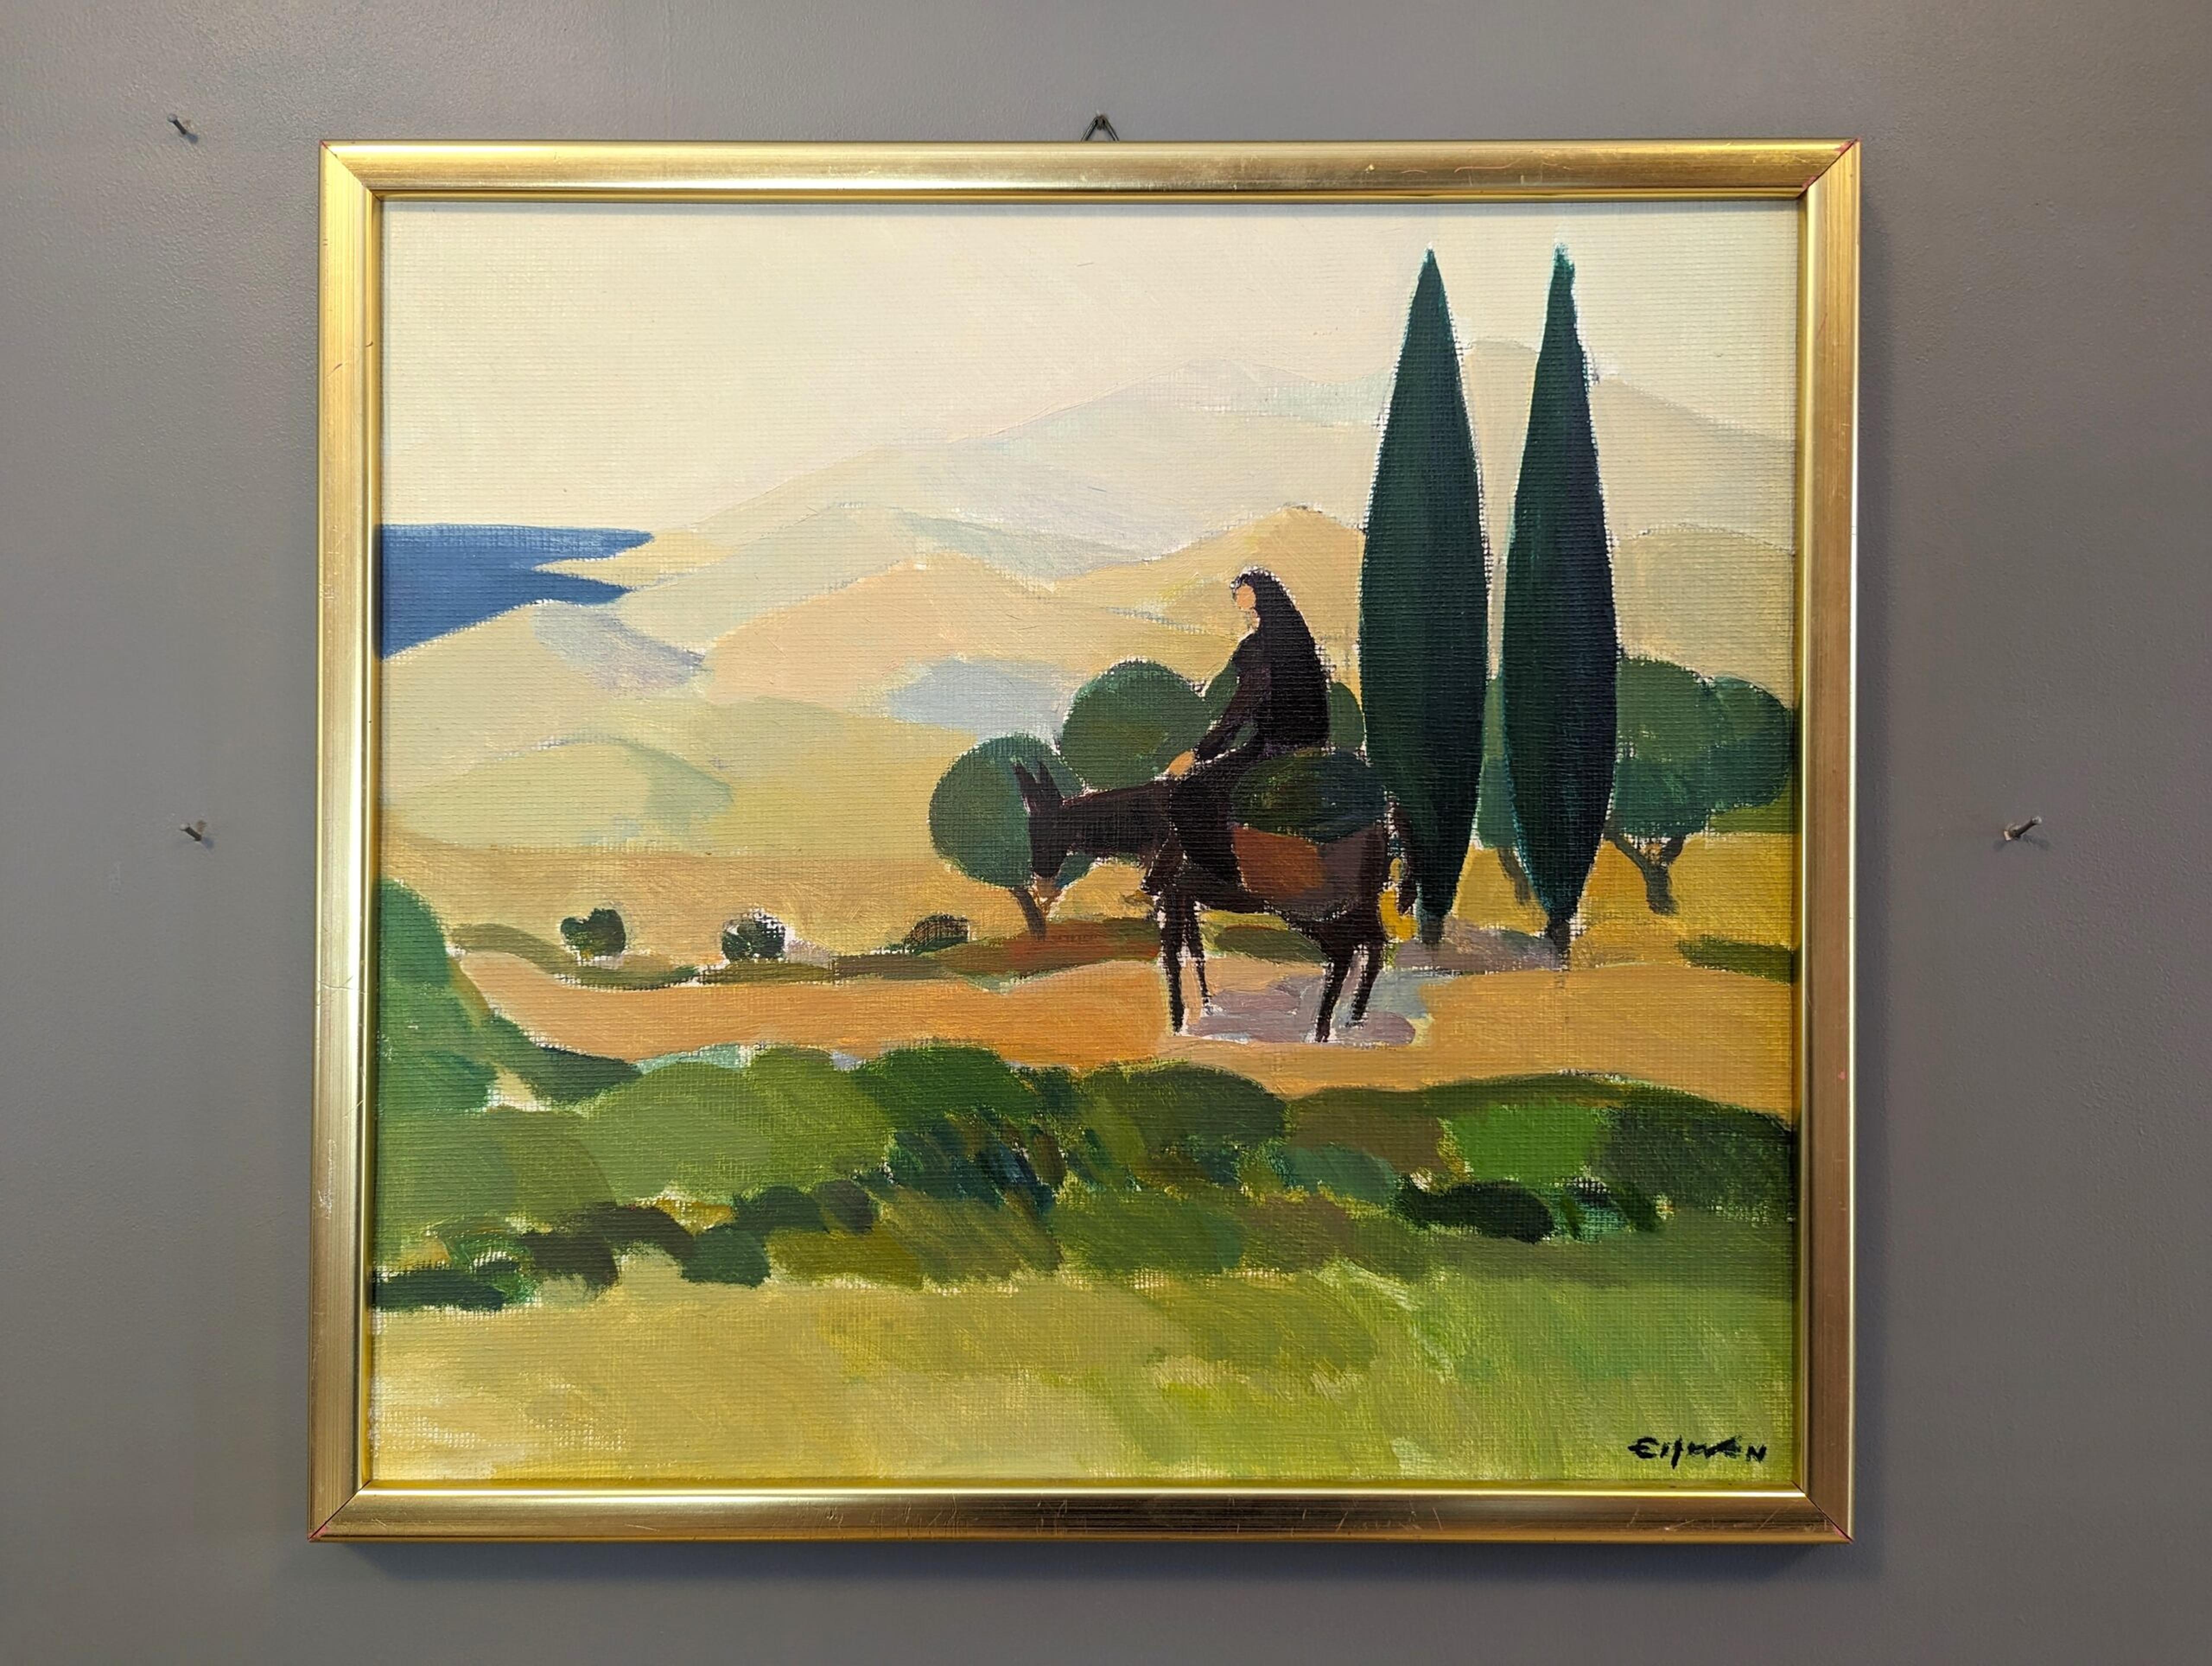 CYPRUS VALLEY
Size: 39.5 x 43.5 cm (including frame)
Oil on canvas board

A wonderfully painted mid-century modernist style landscape painting of Cyprus, executed in oil onto canvas board.

A vast expanse of lush green land unfolds, and a woman is